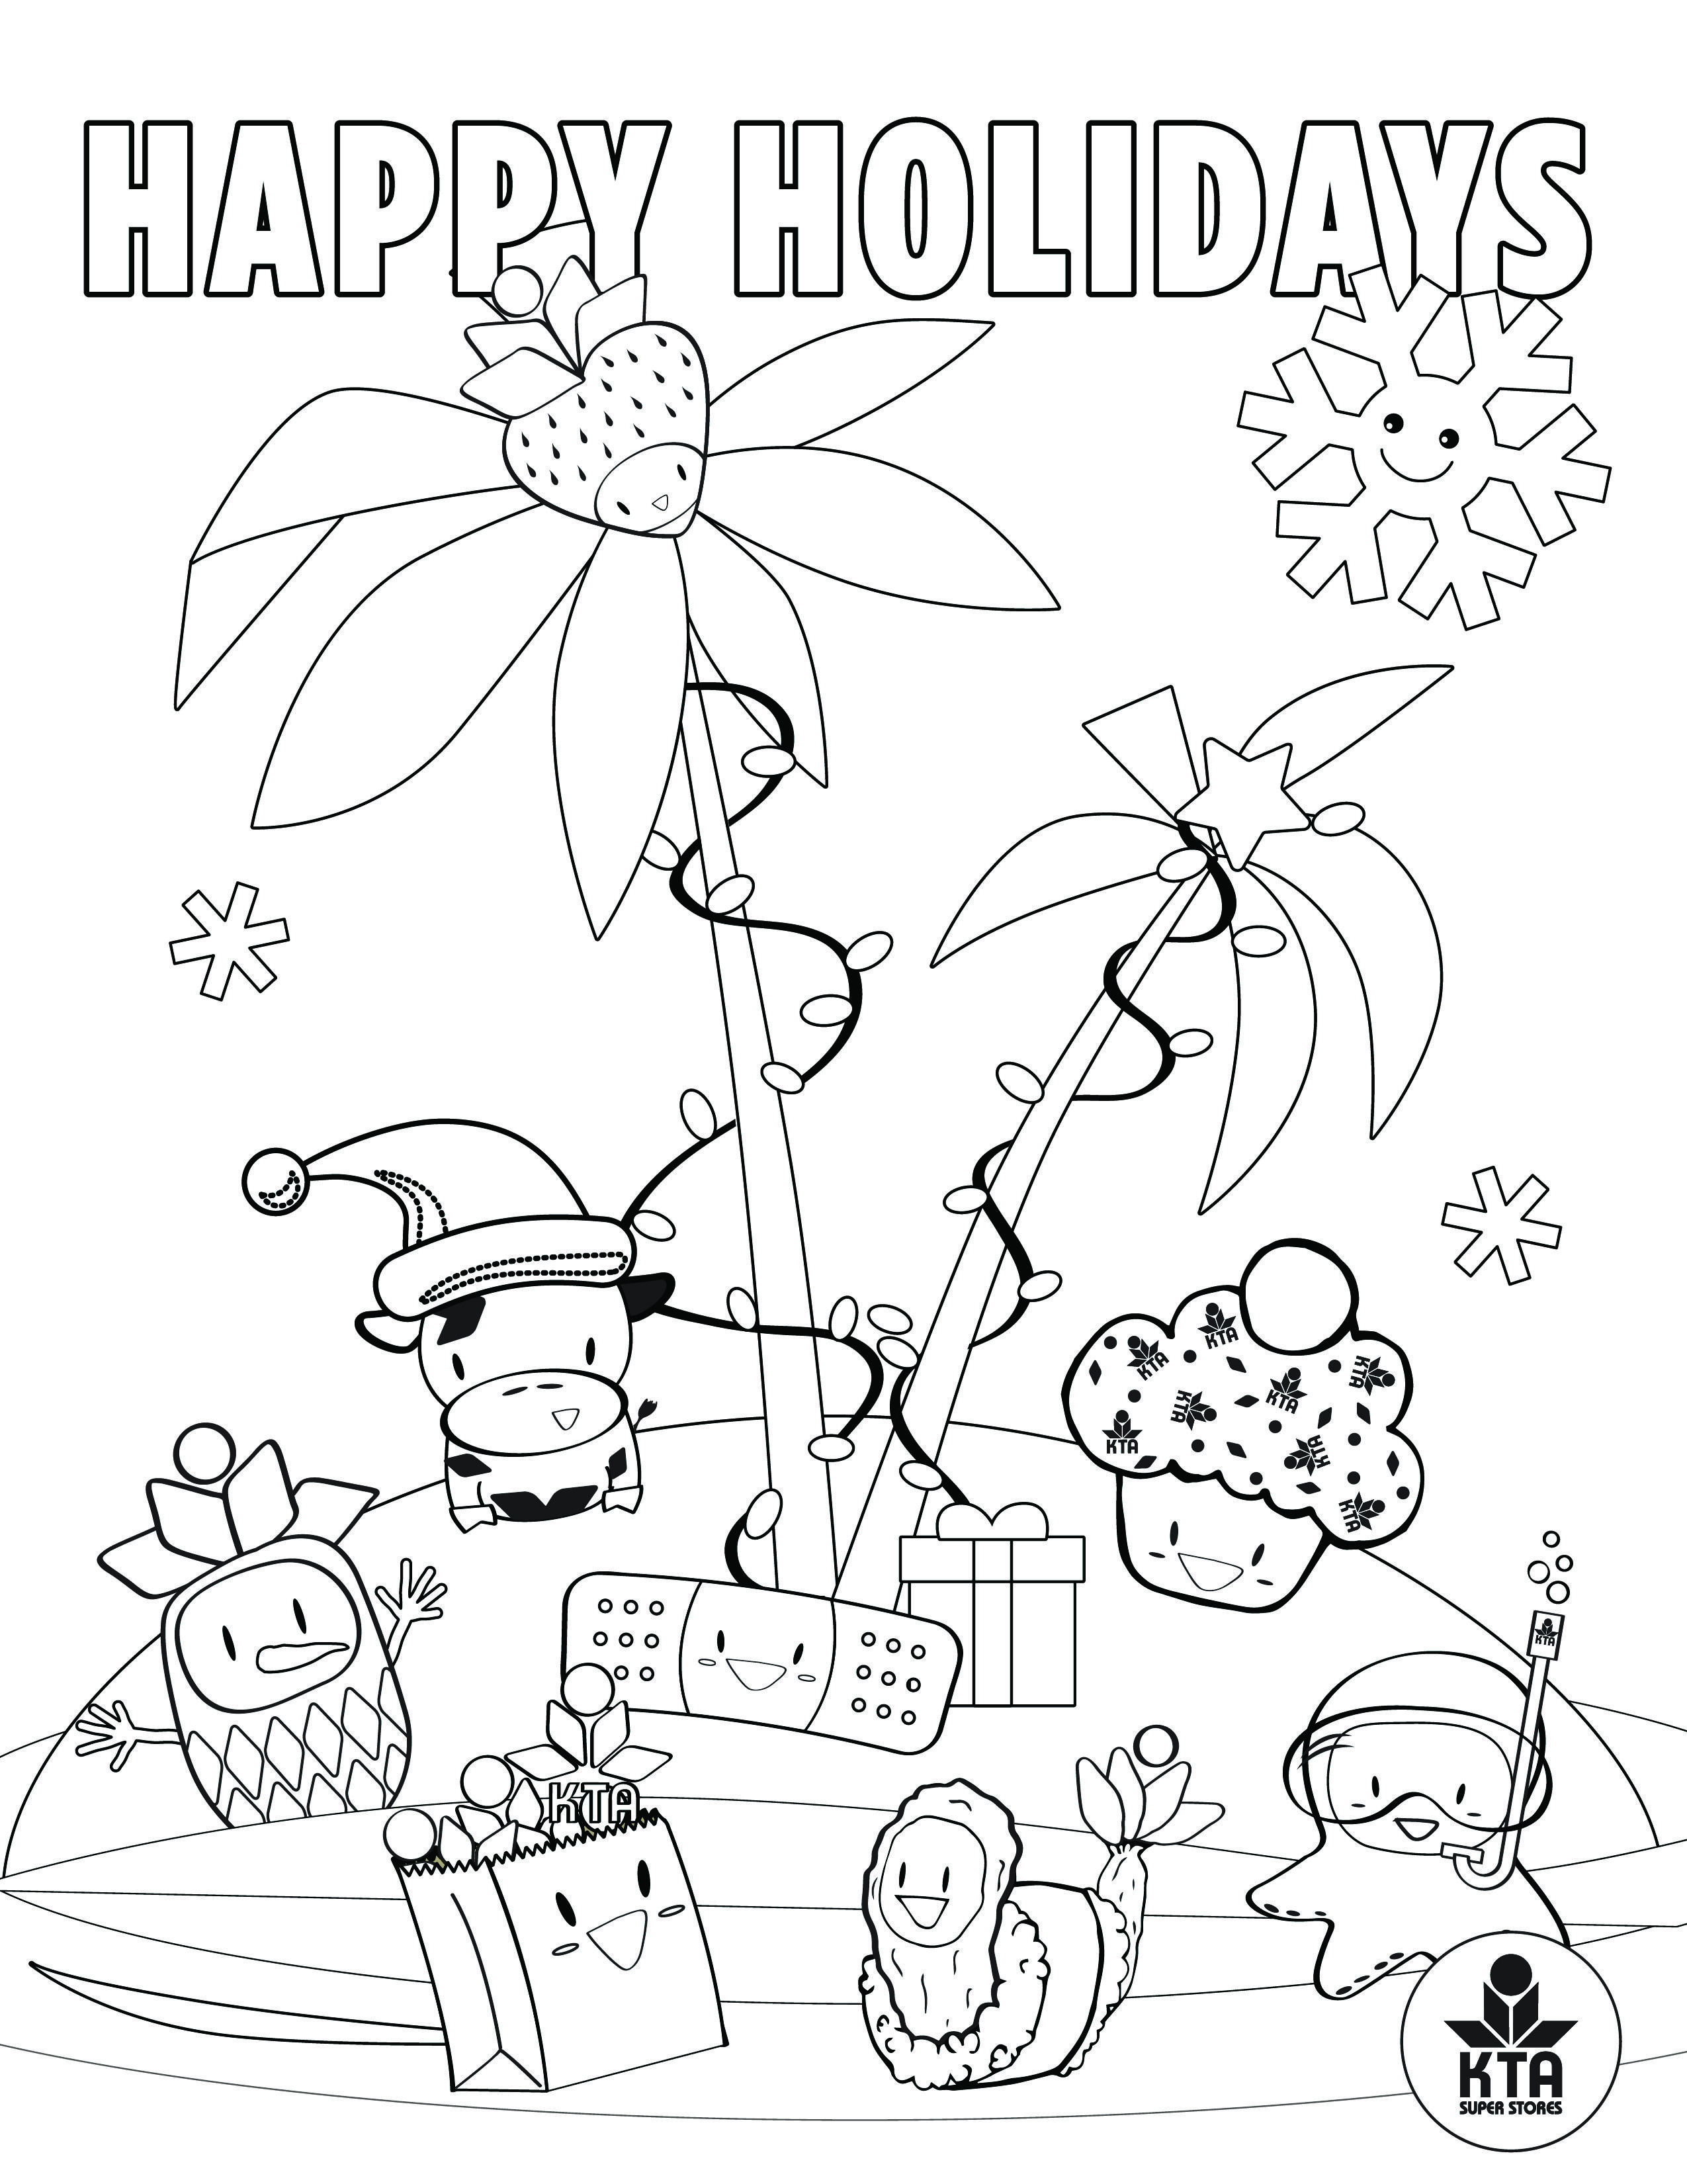 Free holiday coloring page coloring pages color holiday